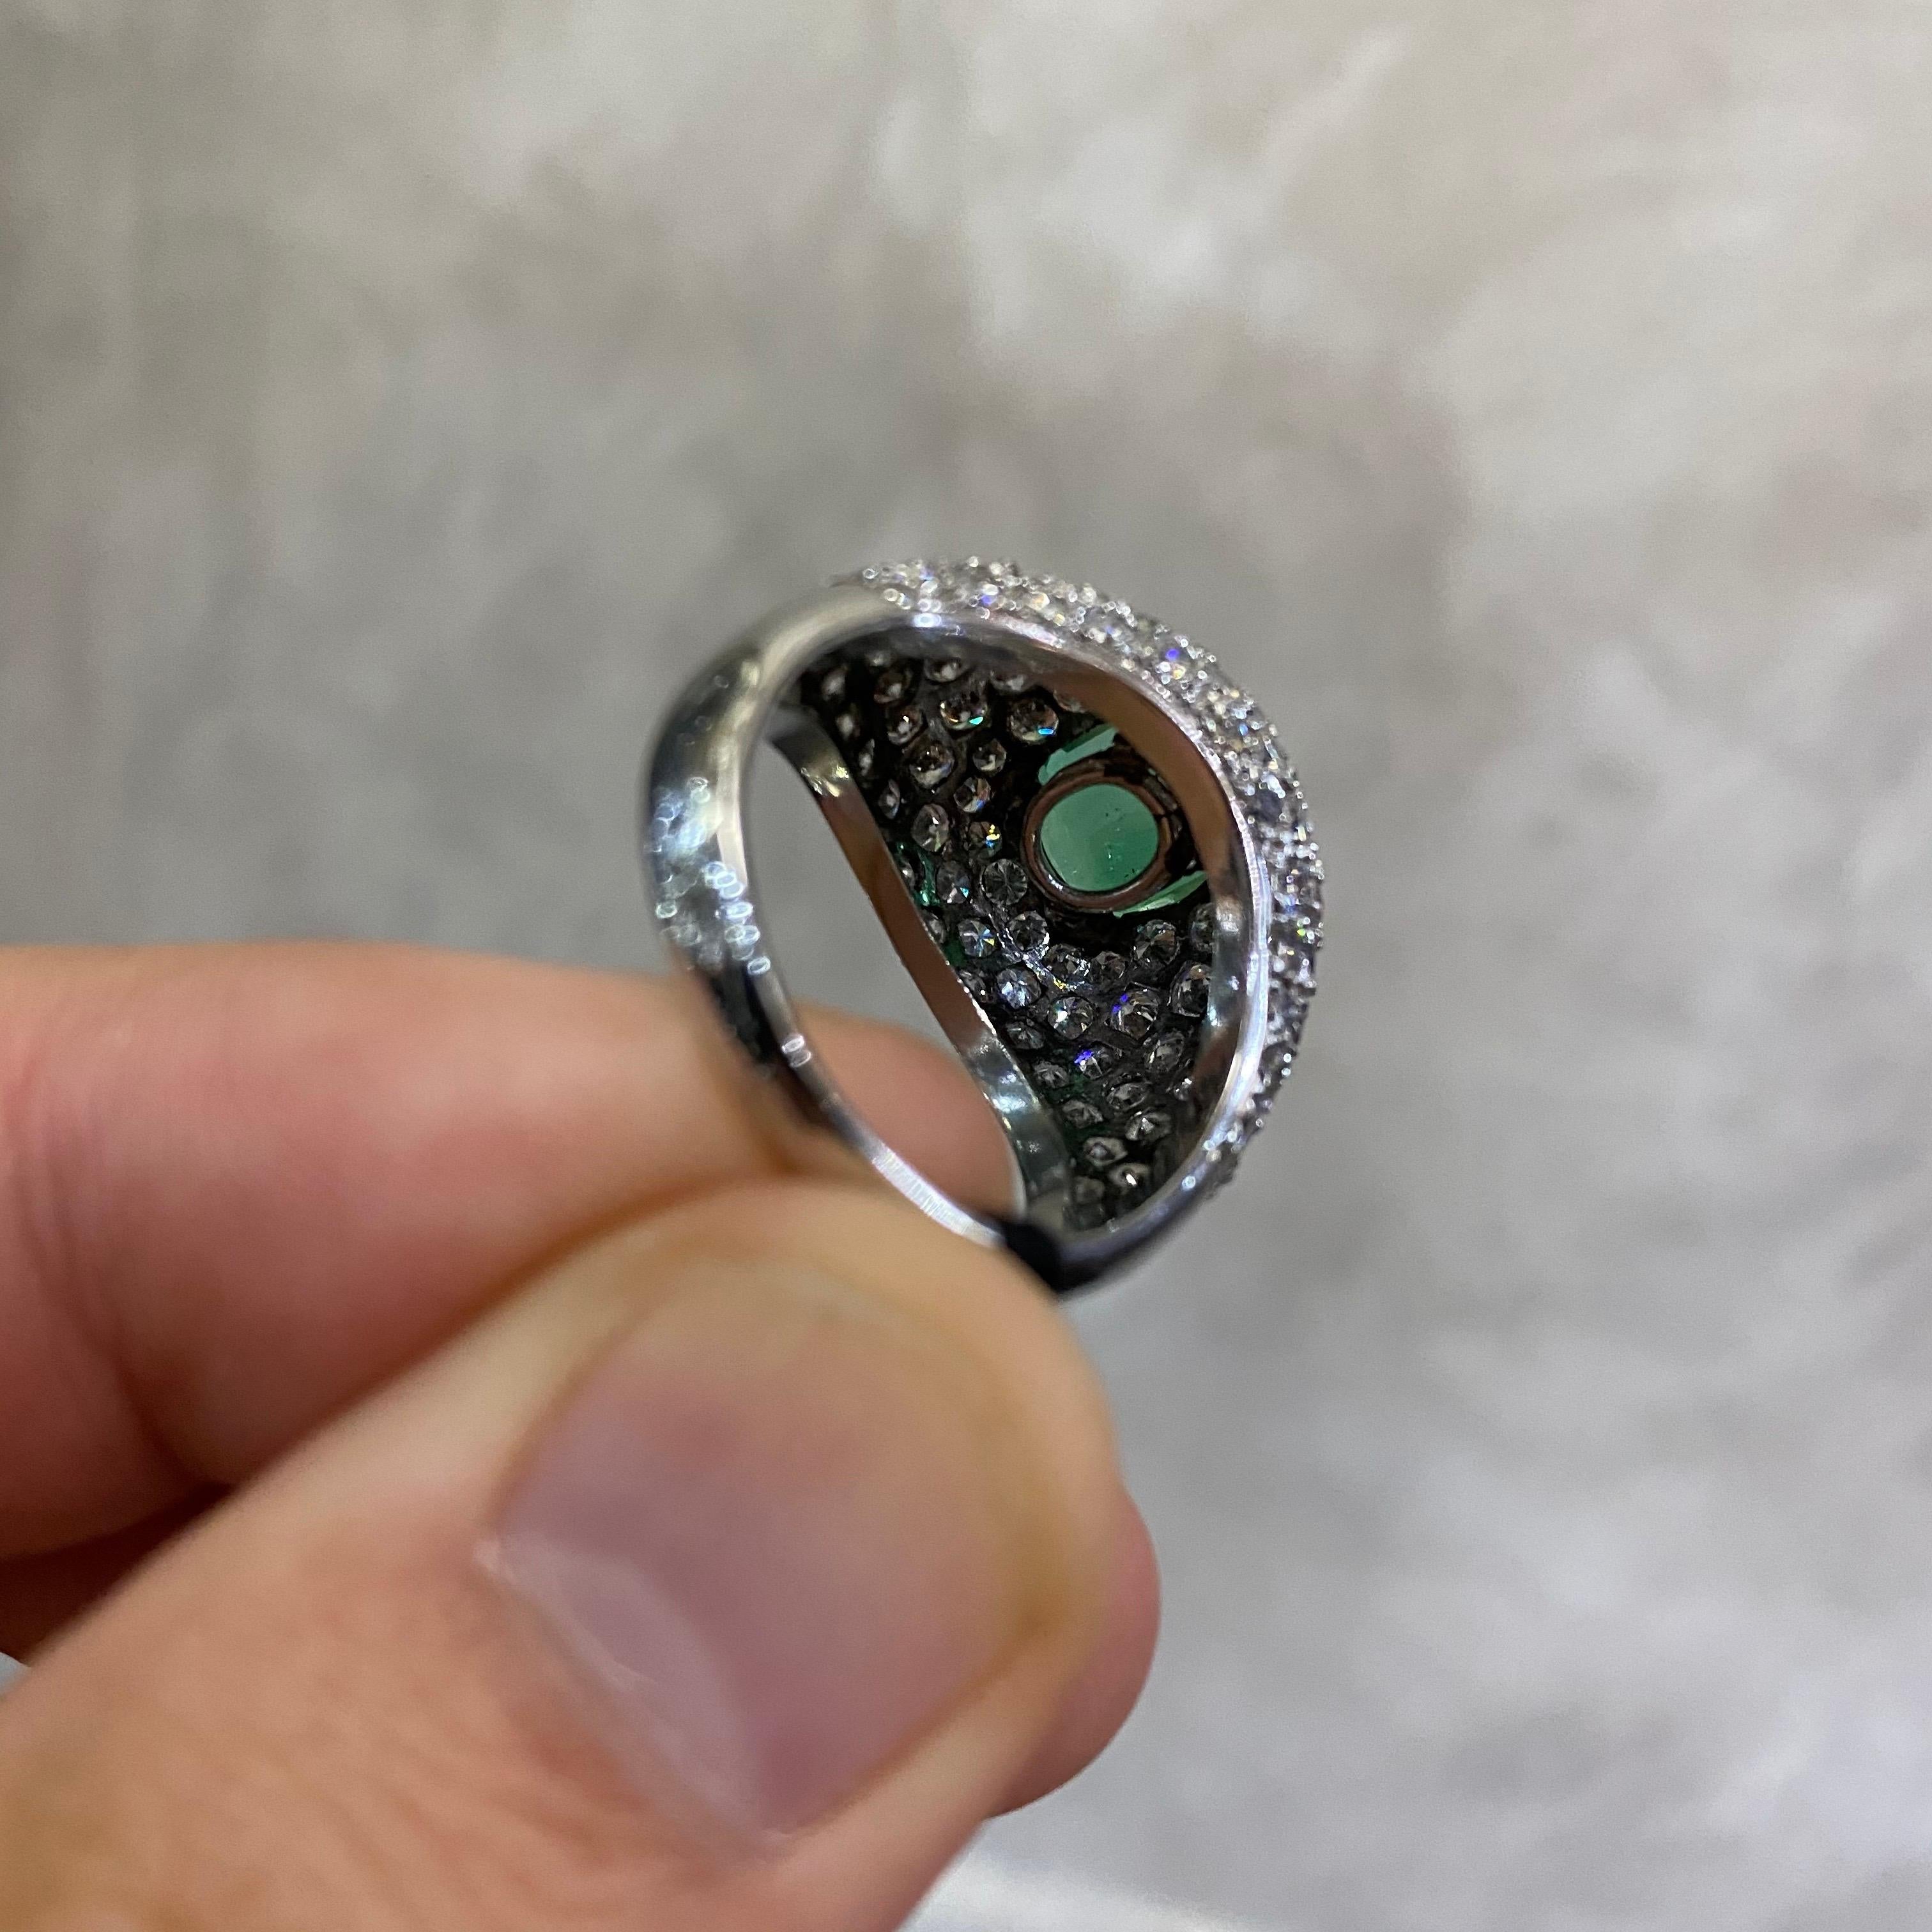 Vintage 1960s/1970s Colombian Emerald Diamond Bombe Cocktail Ring Platinum 11